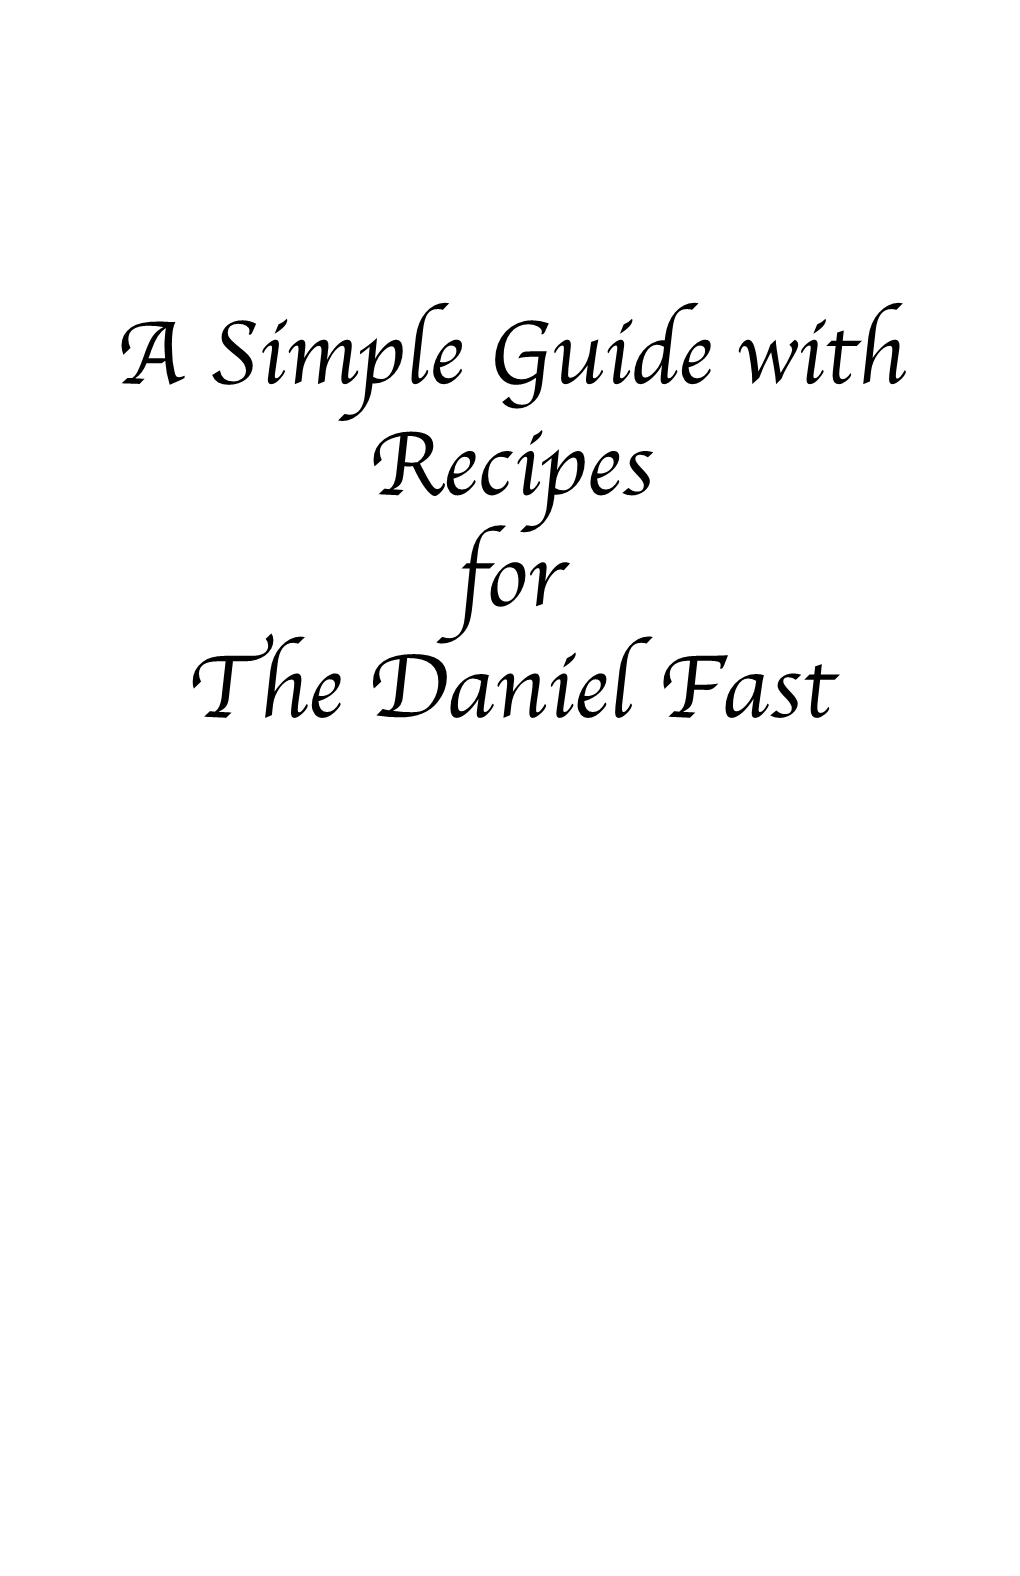 A Simple Guide with Recipes for the Daniel Fast